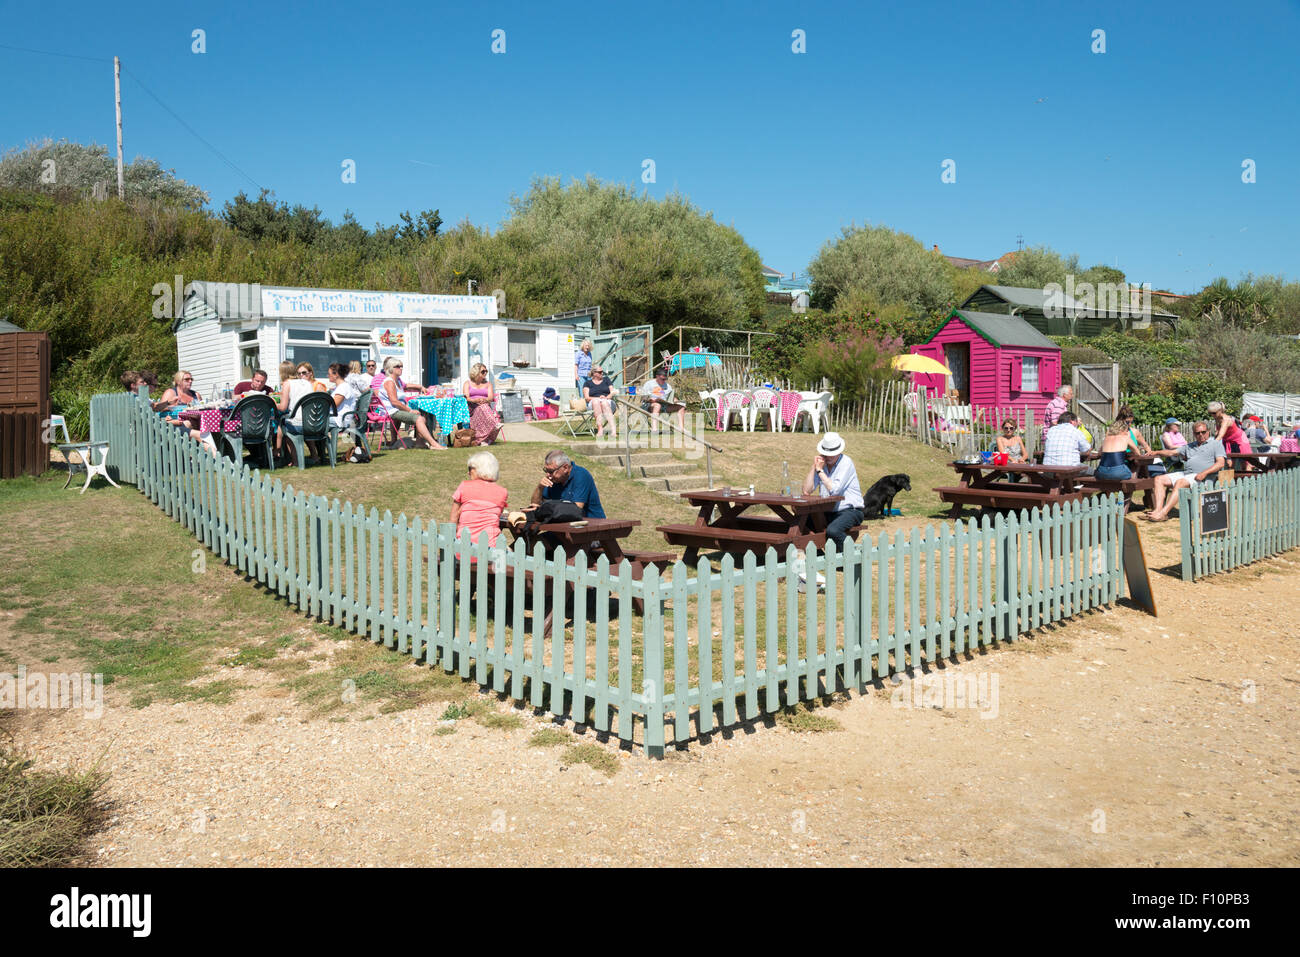 Diners eating outside at the Beach Hut cafe and restaurant on the coast at Bembridge Isle of Wight UK Stock Photo